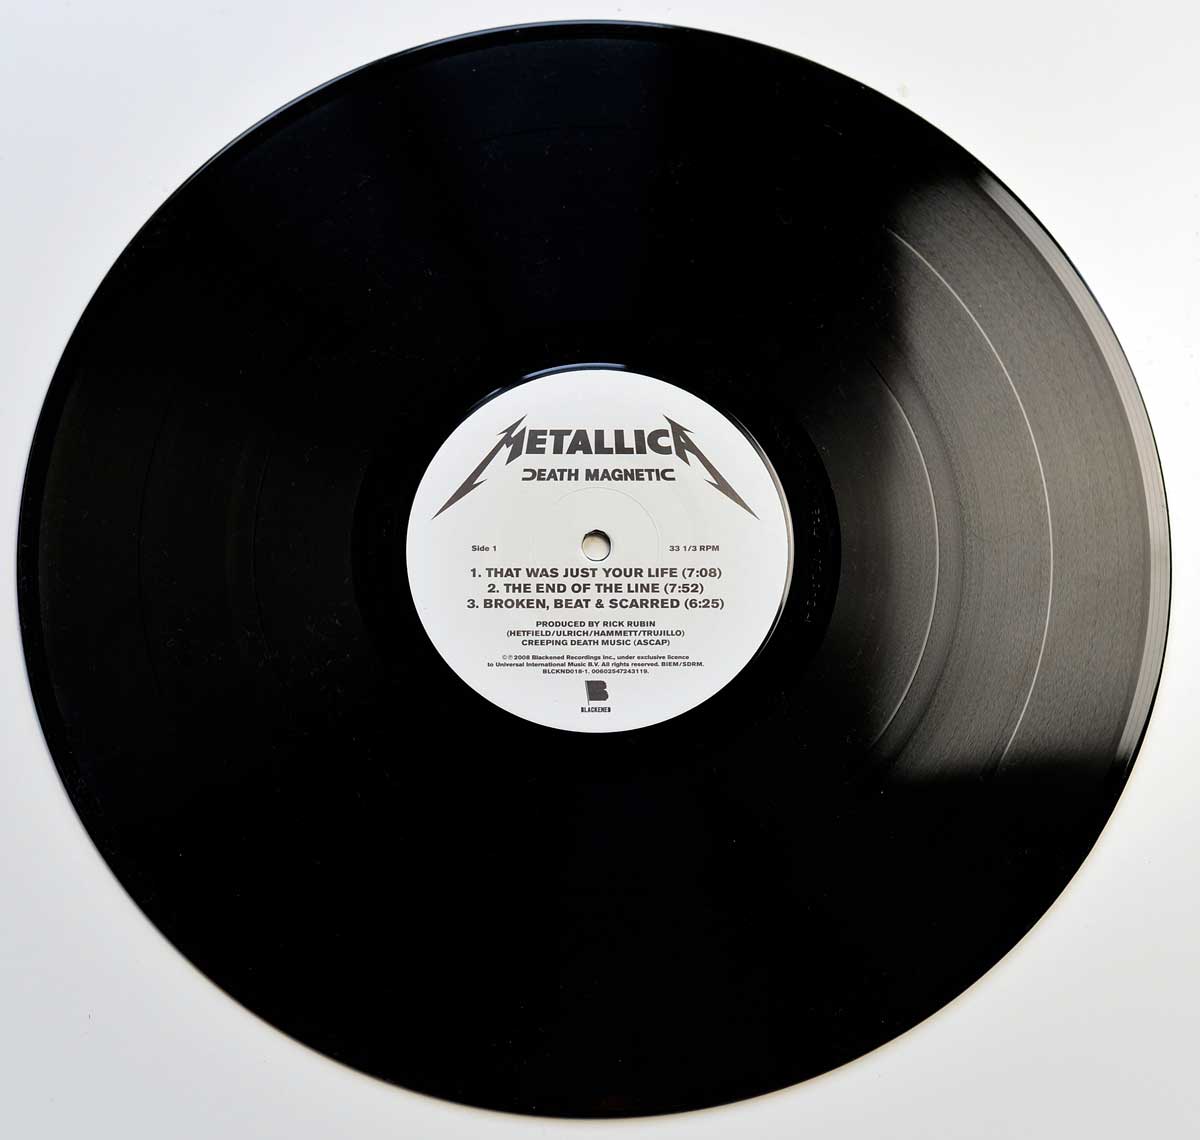 Photo of Side One: of METALLICA - Death Magnetic Blackened Records Gatefold Cover 12" 